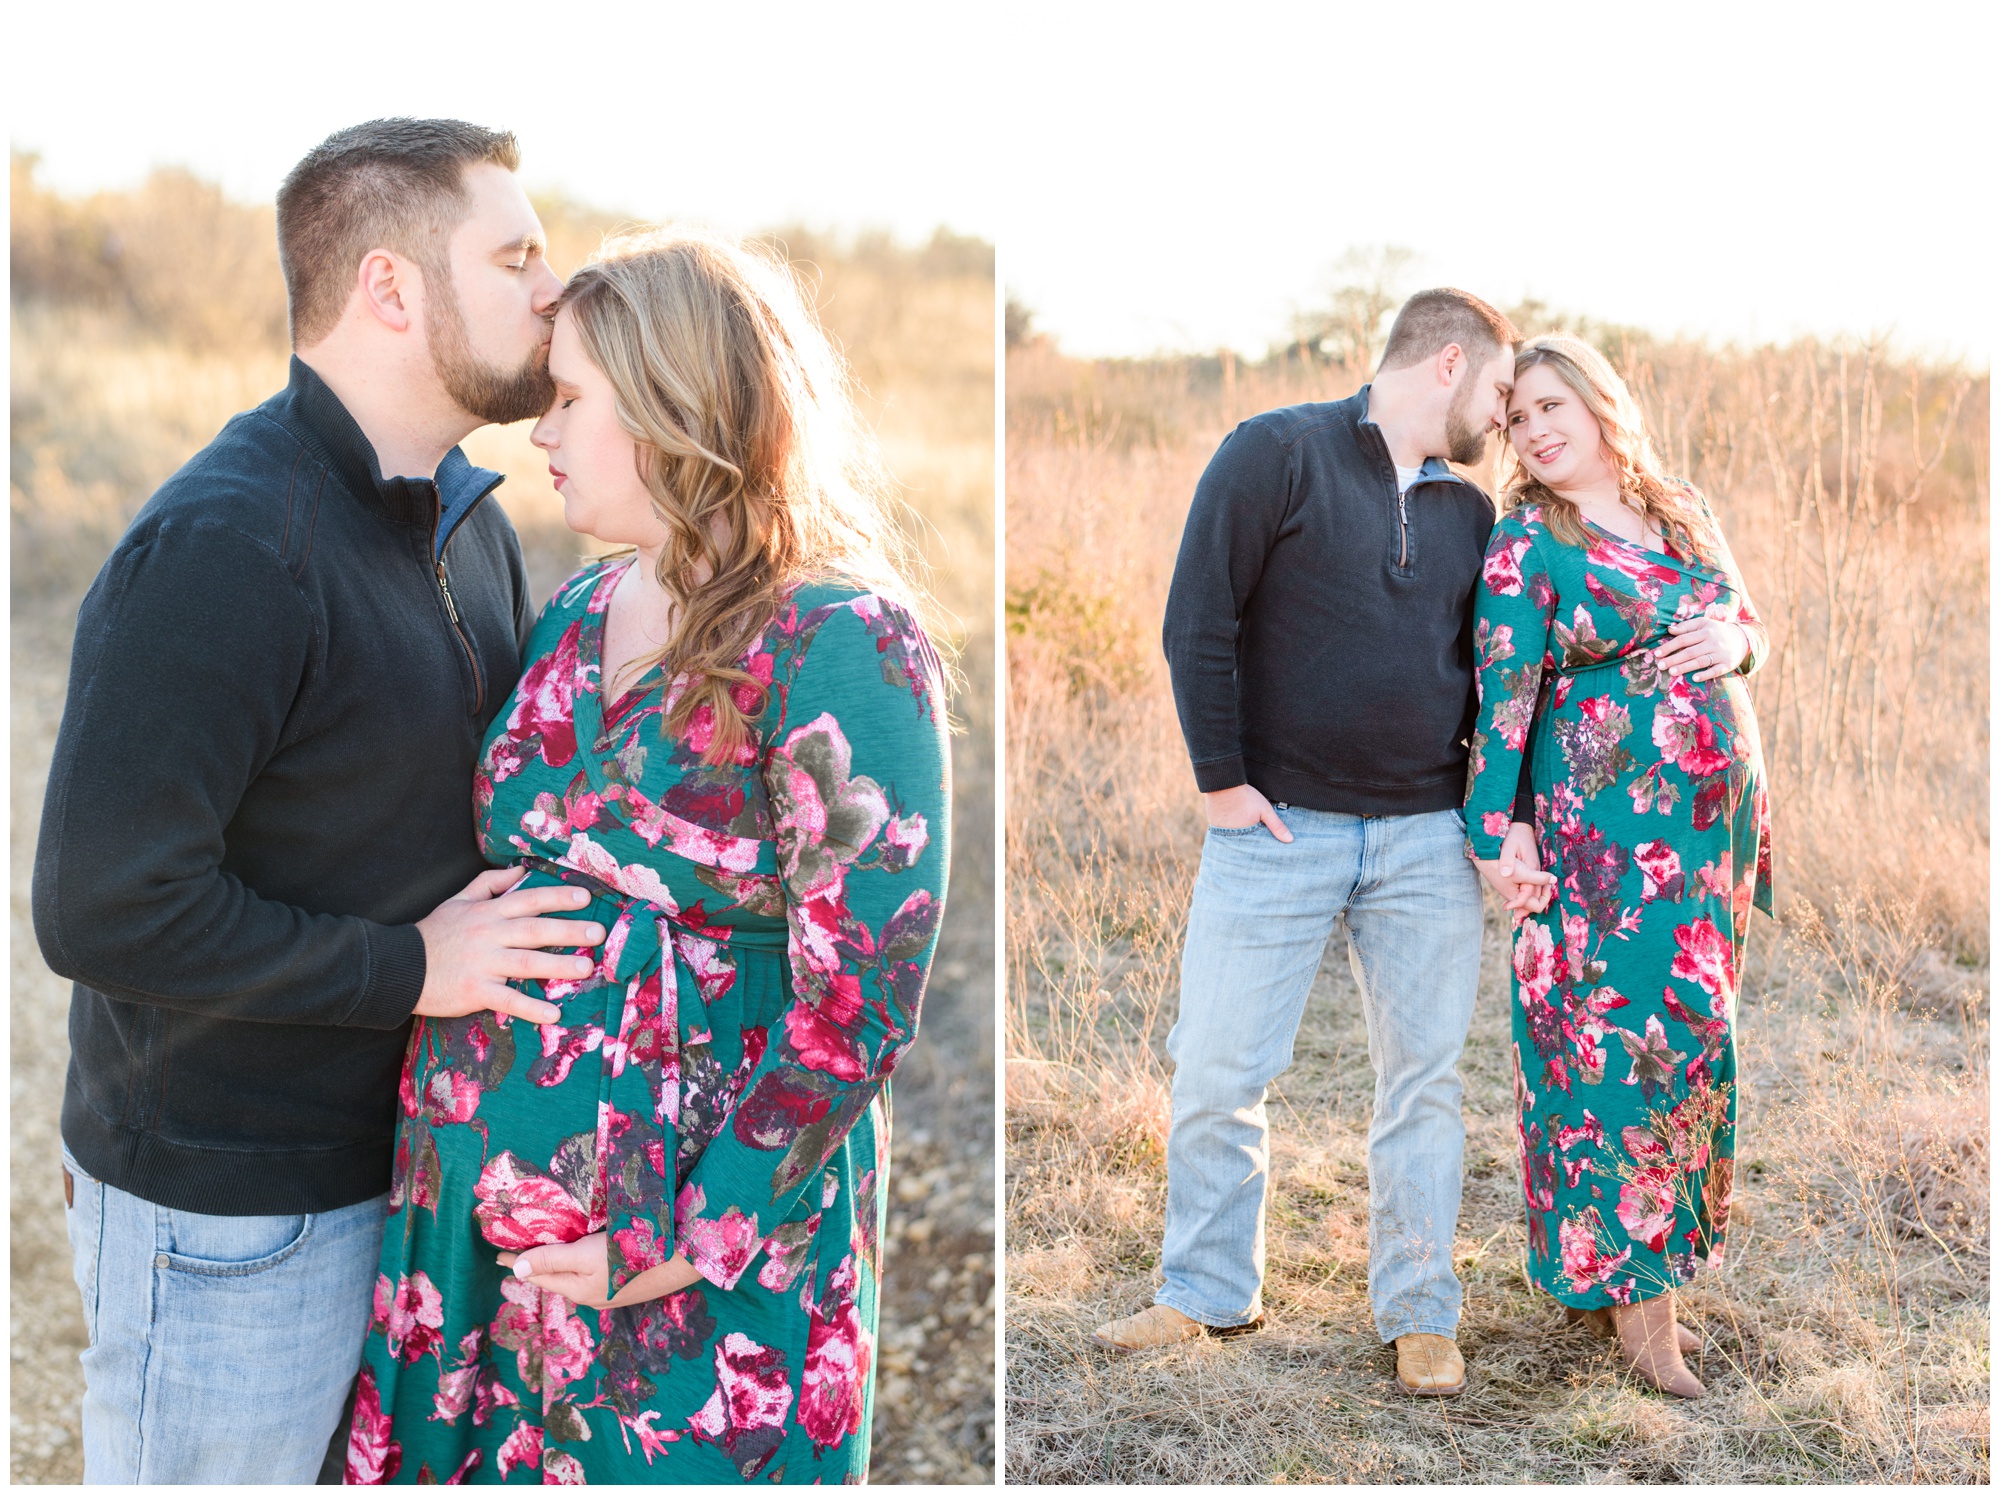 Tandy Hills Natural Area | Fort Worth Maternity Session | Fort Worth Maternity Photographer | Fort Worth Newborn Photographer | Fort Worth Family Photographer | Fort Worth Photographer | Lauren Grimes Photography